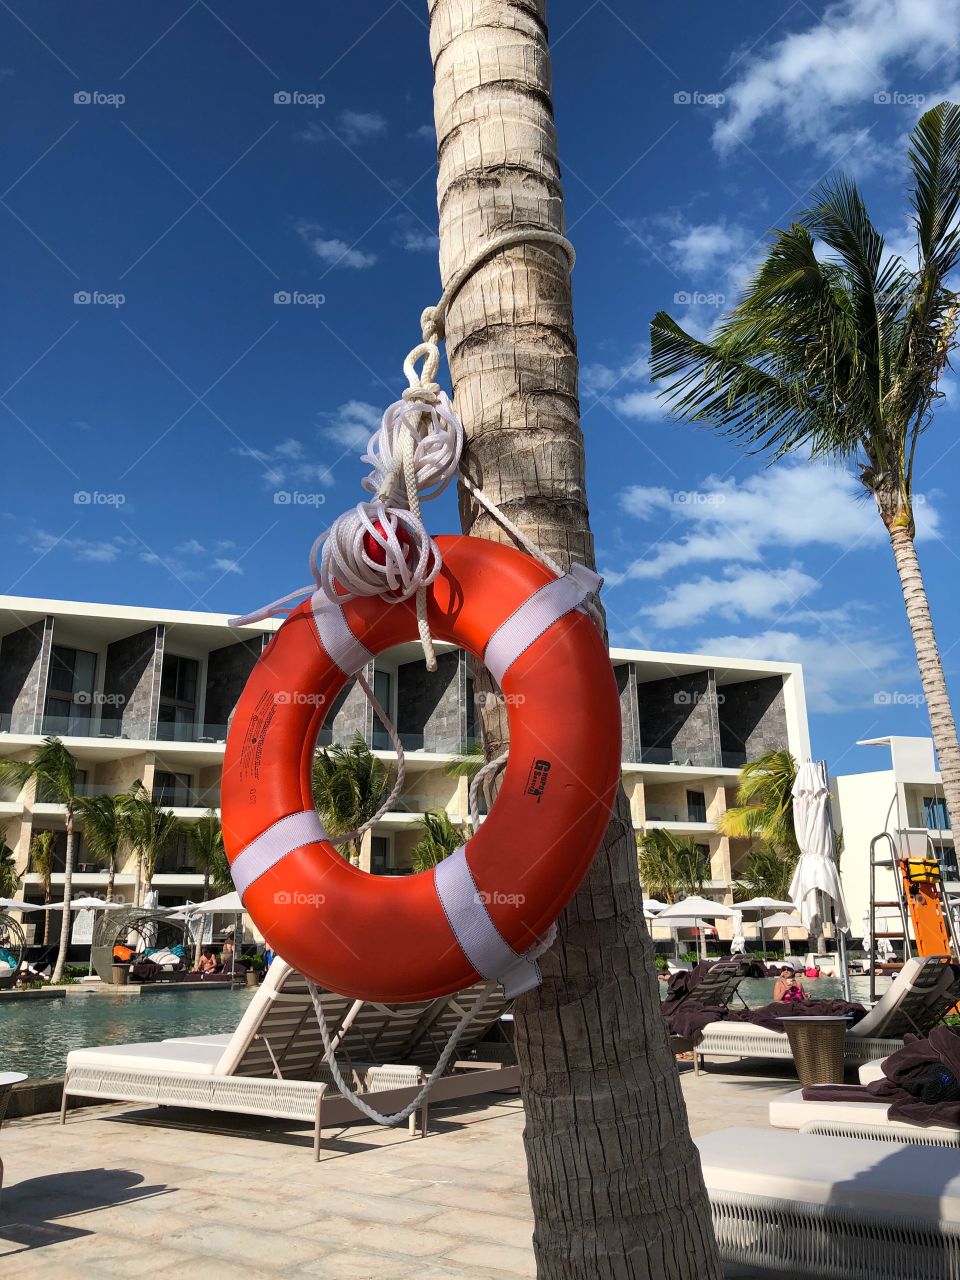 Lifesaver at the TRS Coral hotel pool  